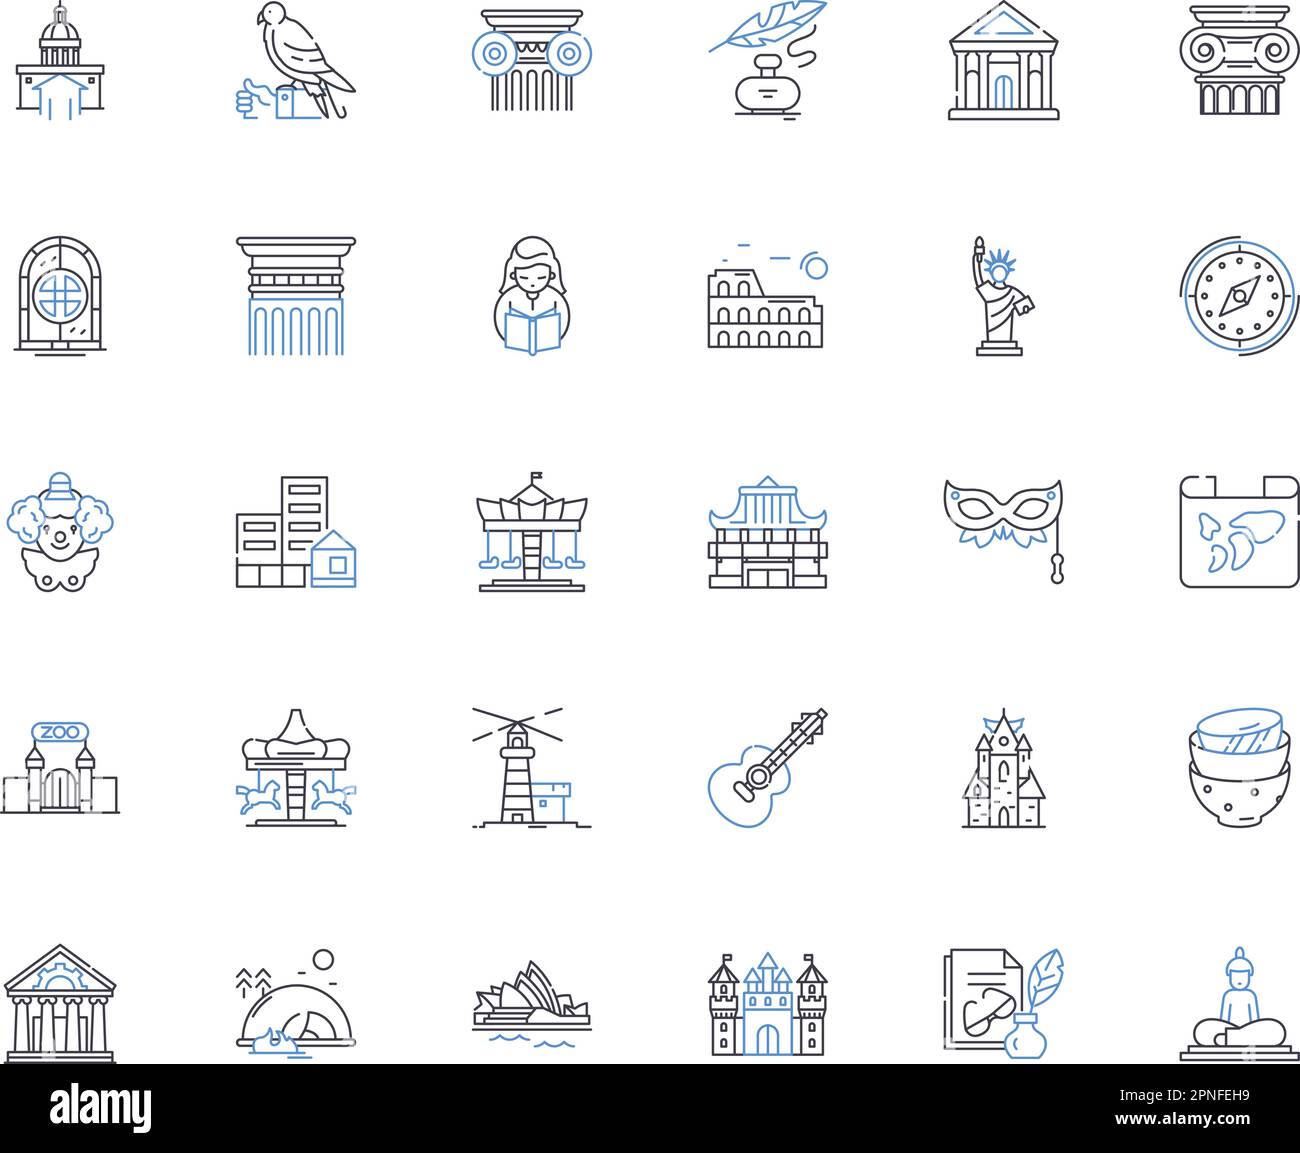 Chronology line icons collection. Timeline, Progression, Sequence, Era, Order, Succession, History vector and linear illustration. Schedule,Duration Stock Vector